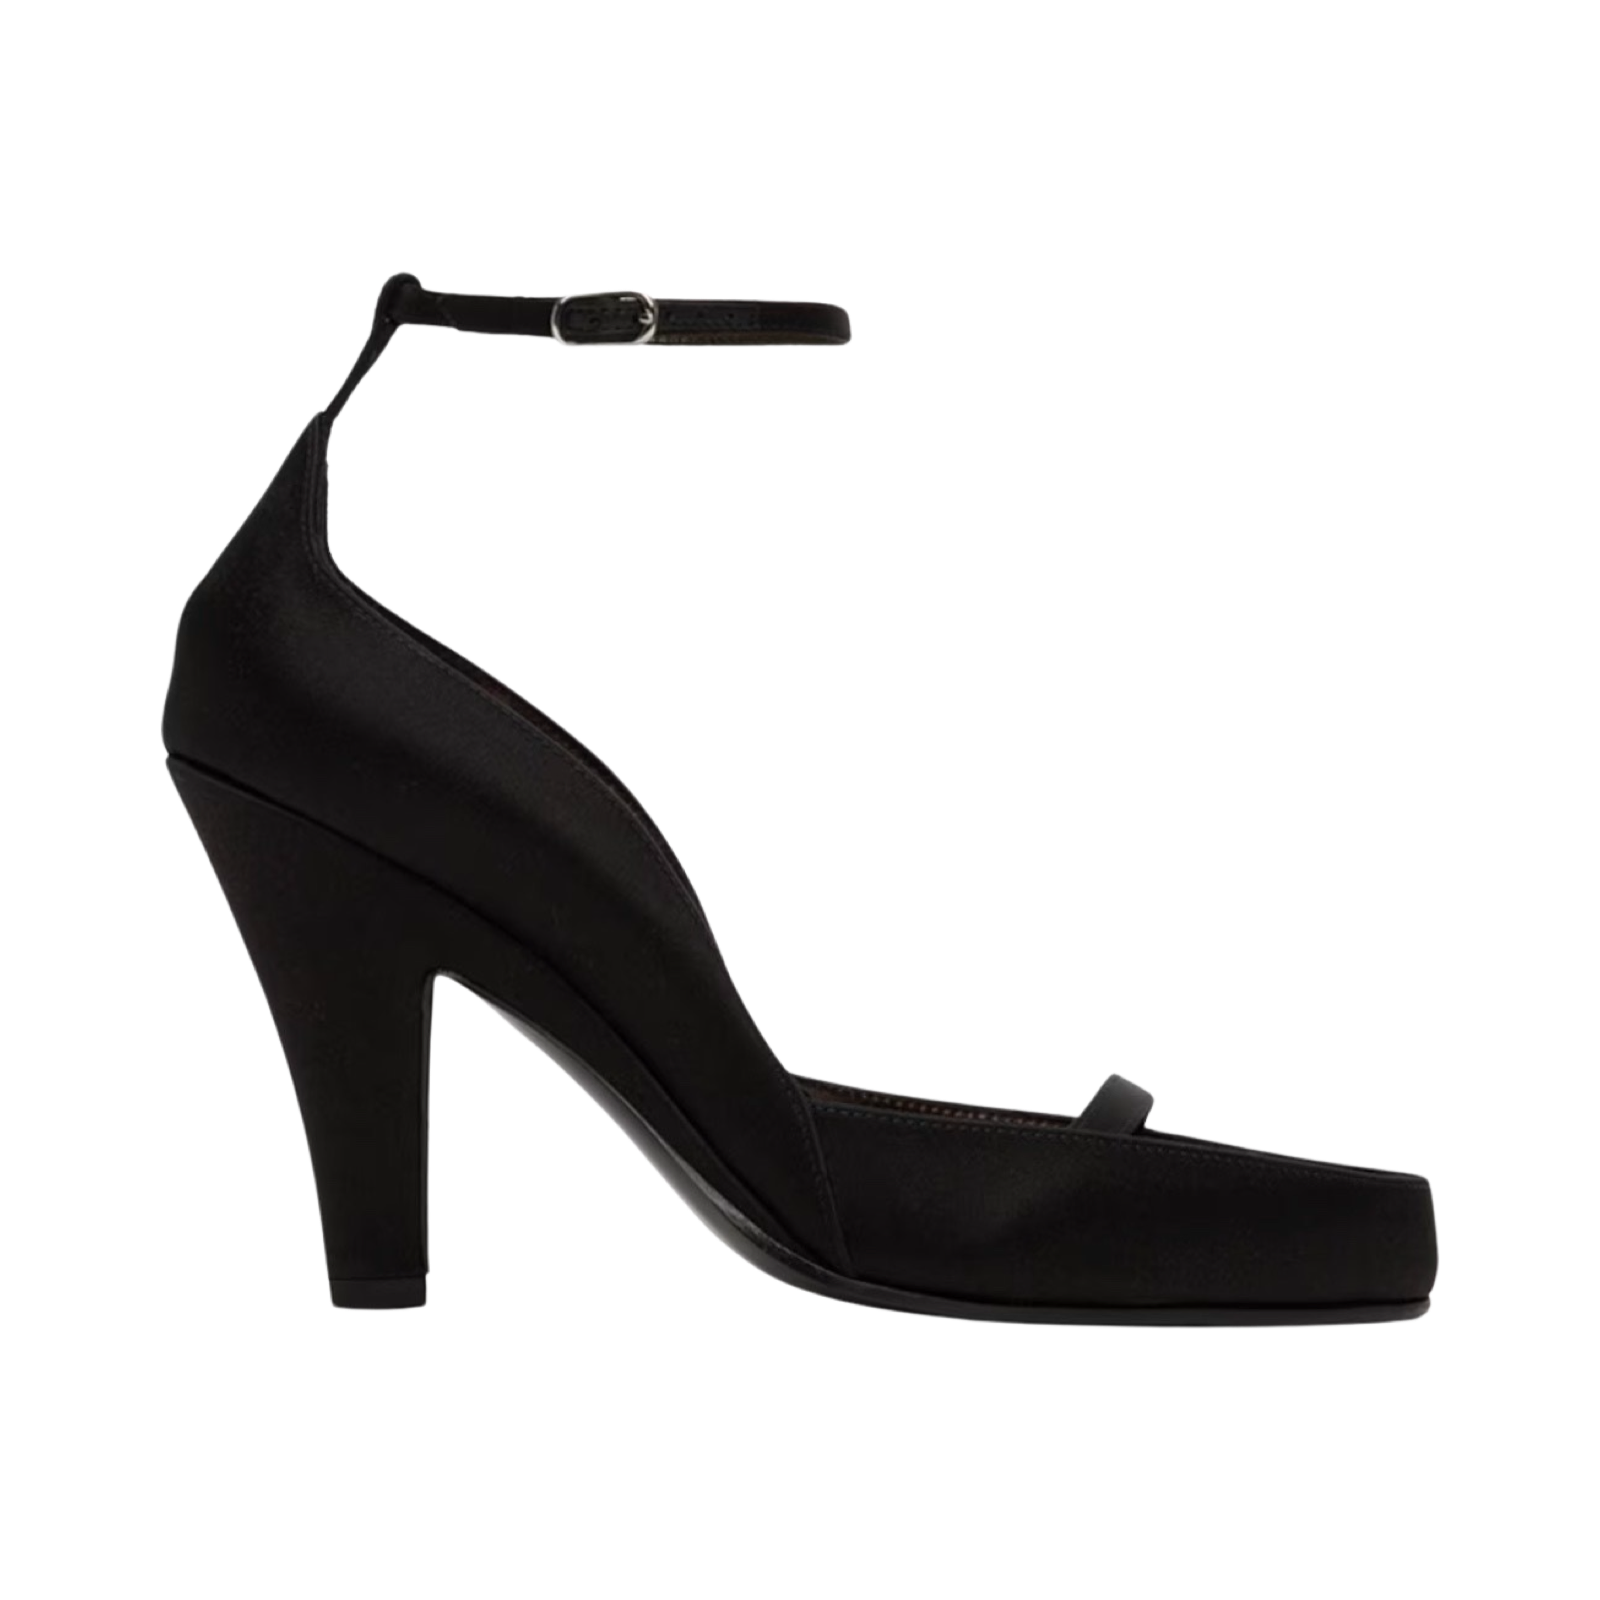 The Row Ankle Strap Heel